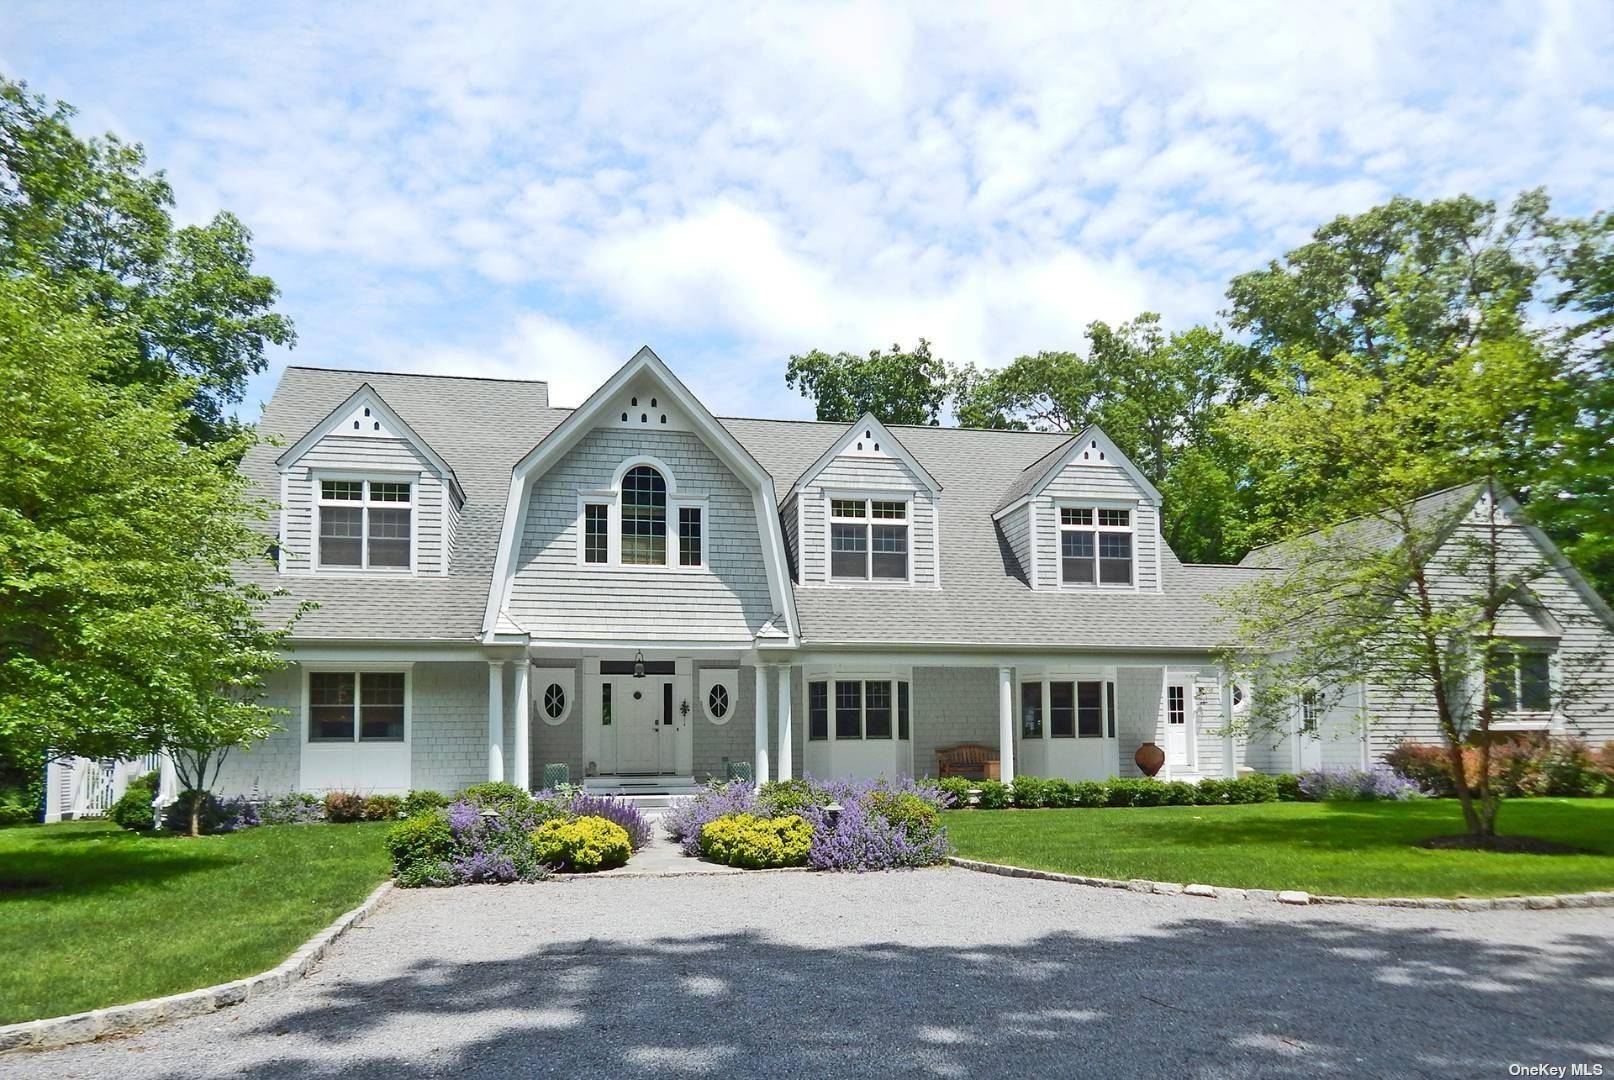 Divinely appointed, this beautiful, custom traditional home is located in the coveted waterfront community of West Banks, North Haven.